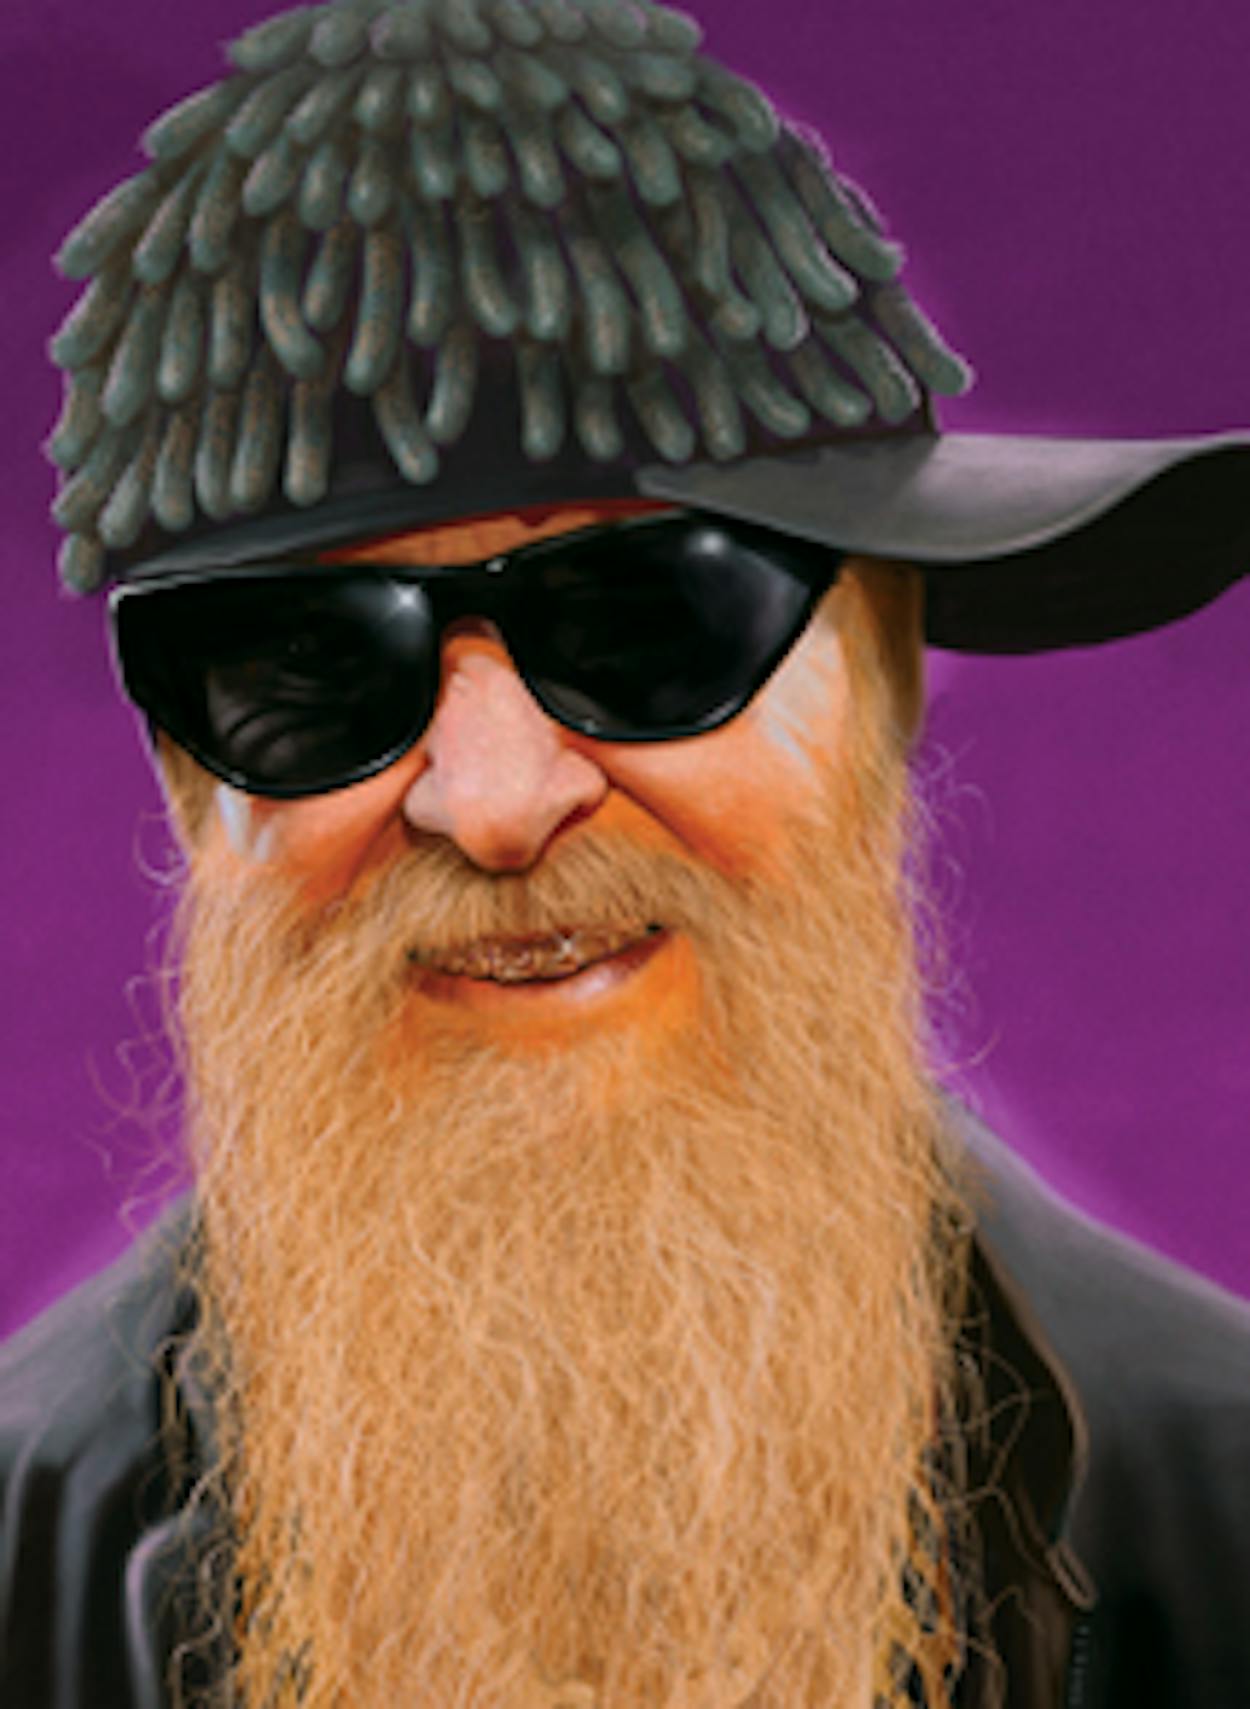 Billy Gibbons illustration by Dale Stephanos.